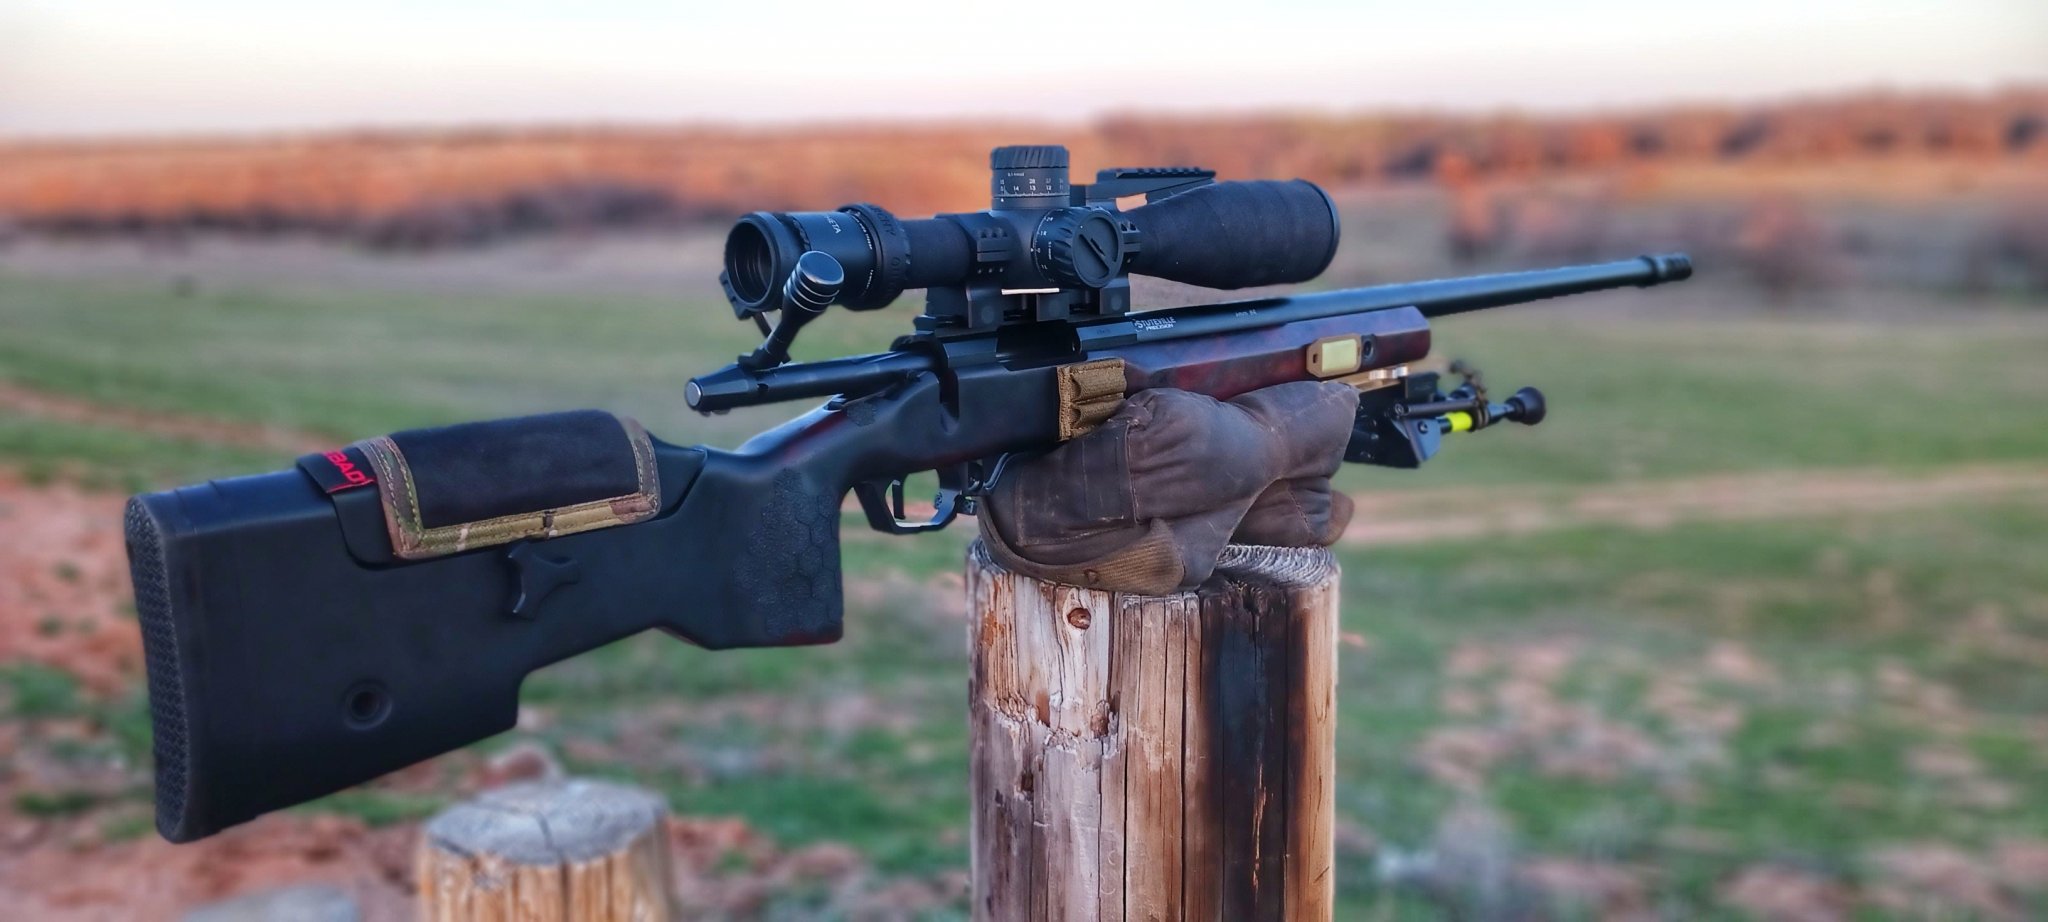 Rifle Scopes - Foundation users, Hawkins ring height? | Sniper's Hide Forum